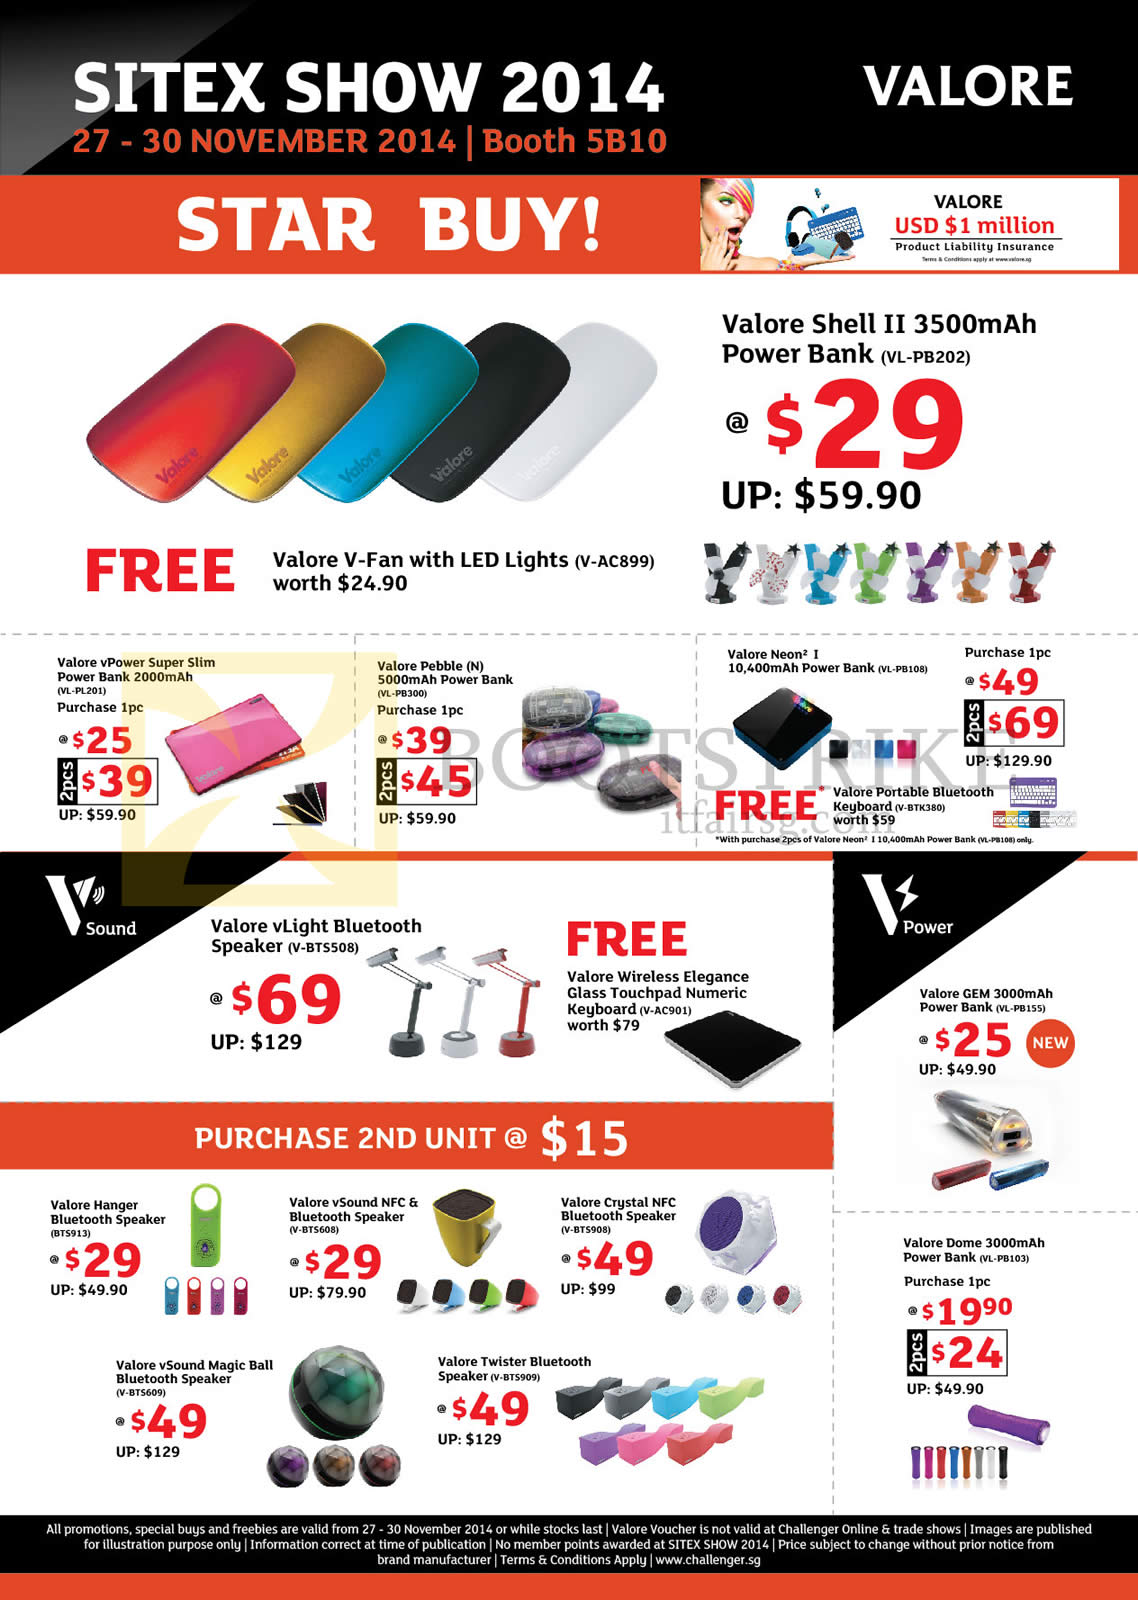 SITEX 2014 price list image brochure of Challenger Valore Accessories, Speakers, Power Banks, Shell II, VPower, Pebble, Neon, VLight, Gem, Dome